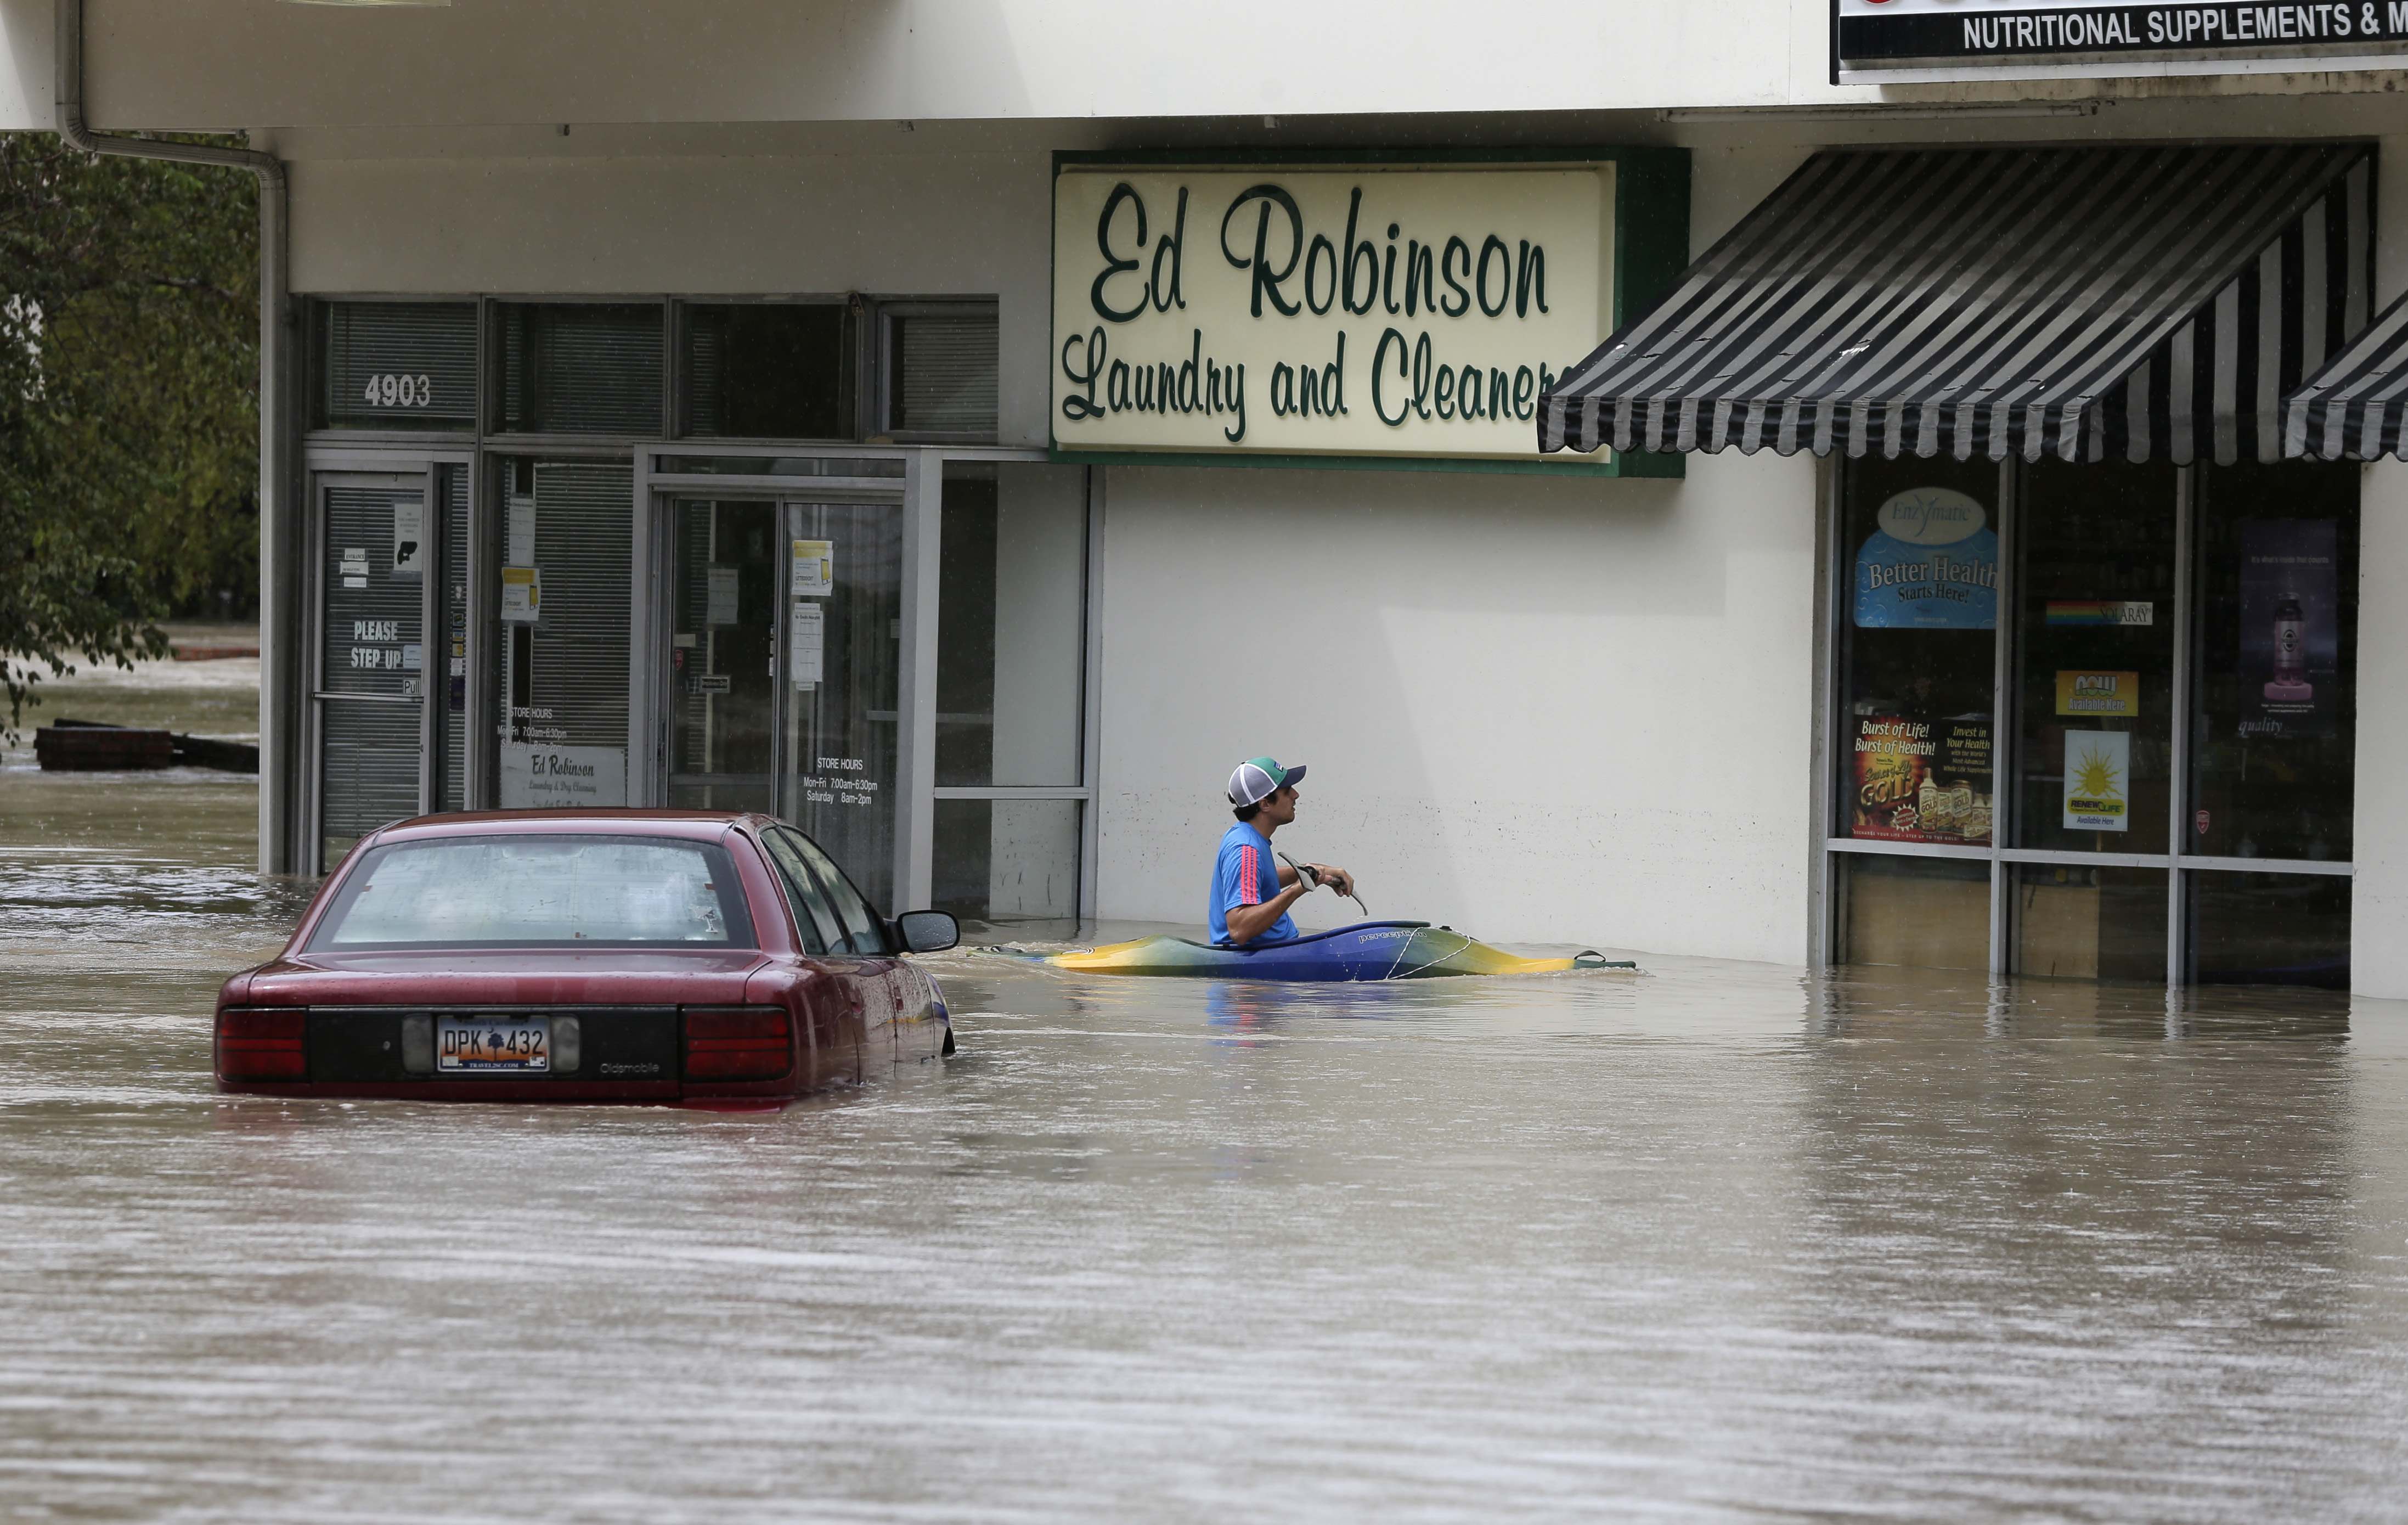 Jordan Bennett, of Rock Hill, S.C., paddles up to a flooded store in Columbia, S.C., Sunday, Oct. 4, 2015.